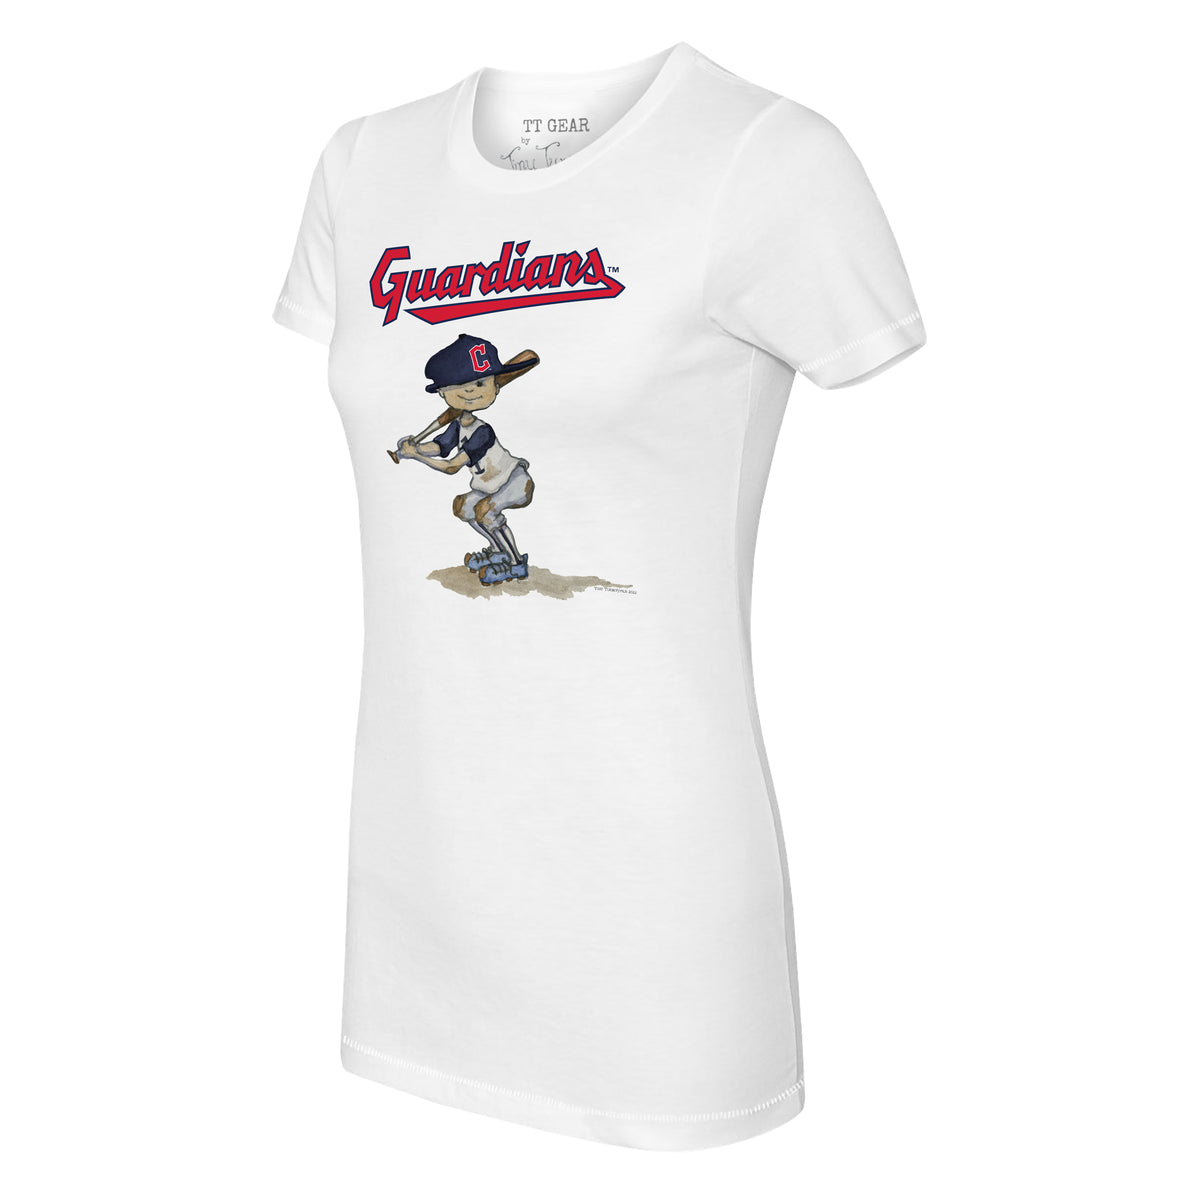 Cleveland Guardians Kate The Catcher Tee Shirt Women's XS / White